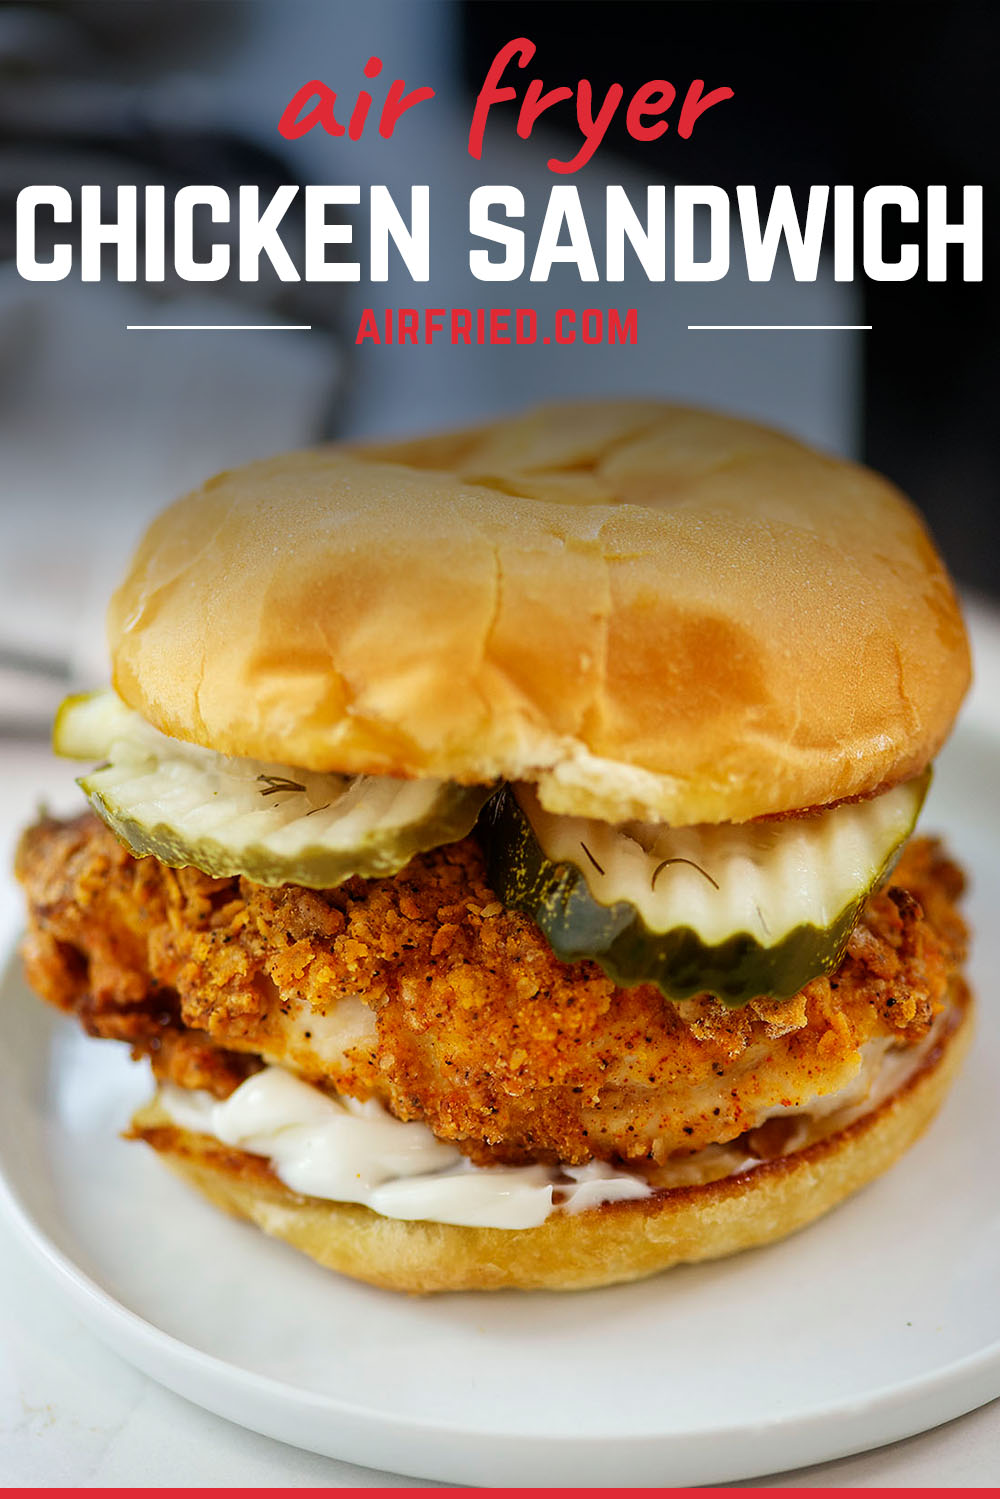 This is the best air fryer chicken sandwich recipe we have made yet!  We end up with a tender chicken breast and a crispy breading on the outside.